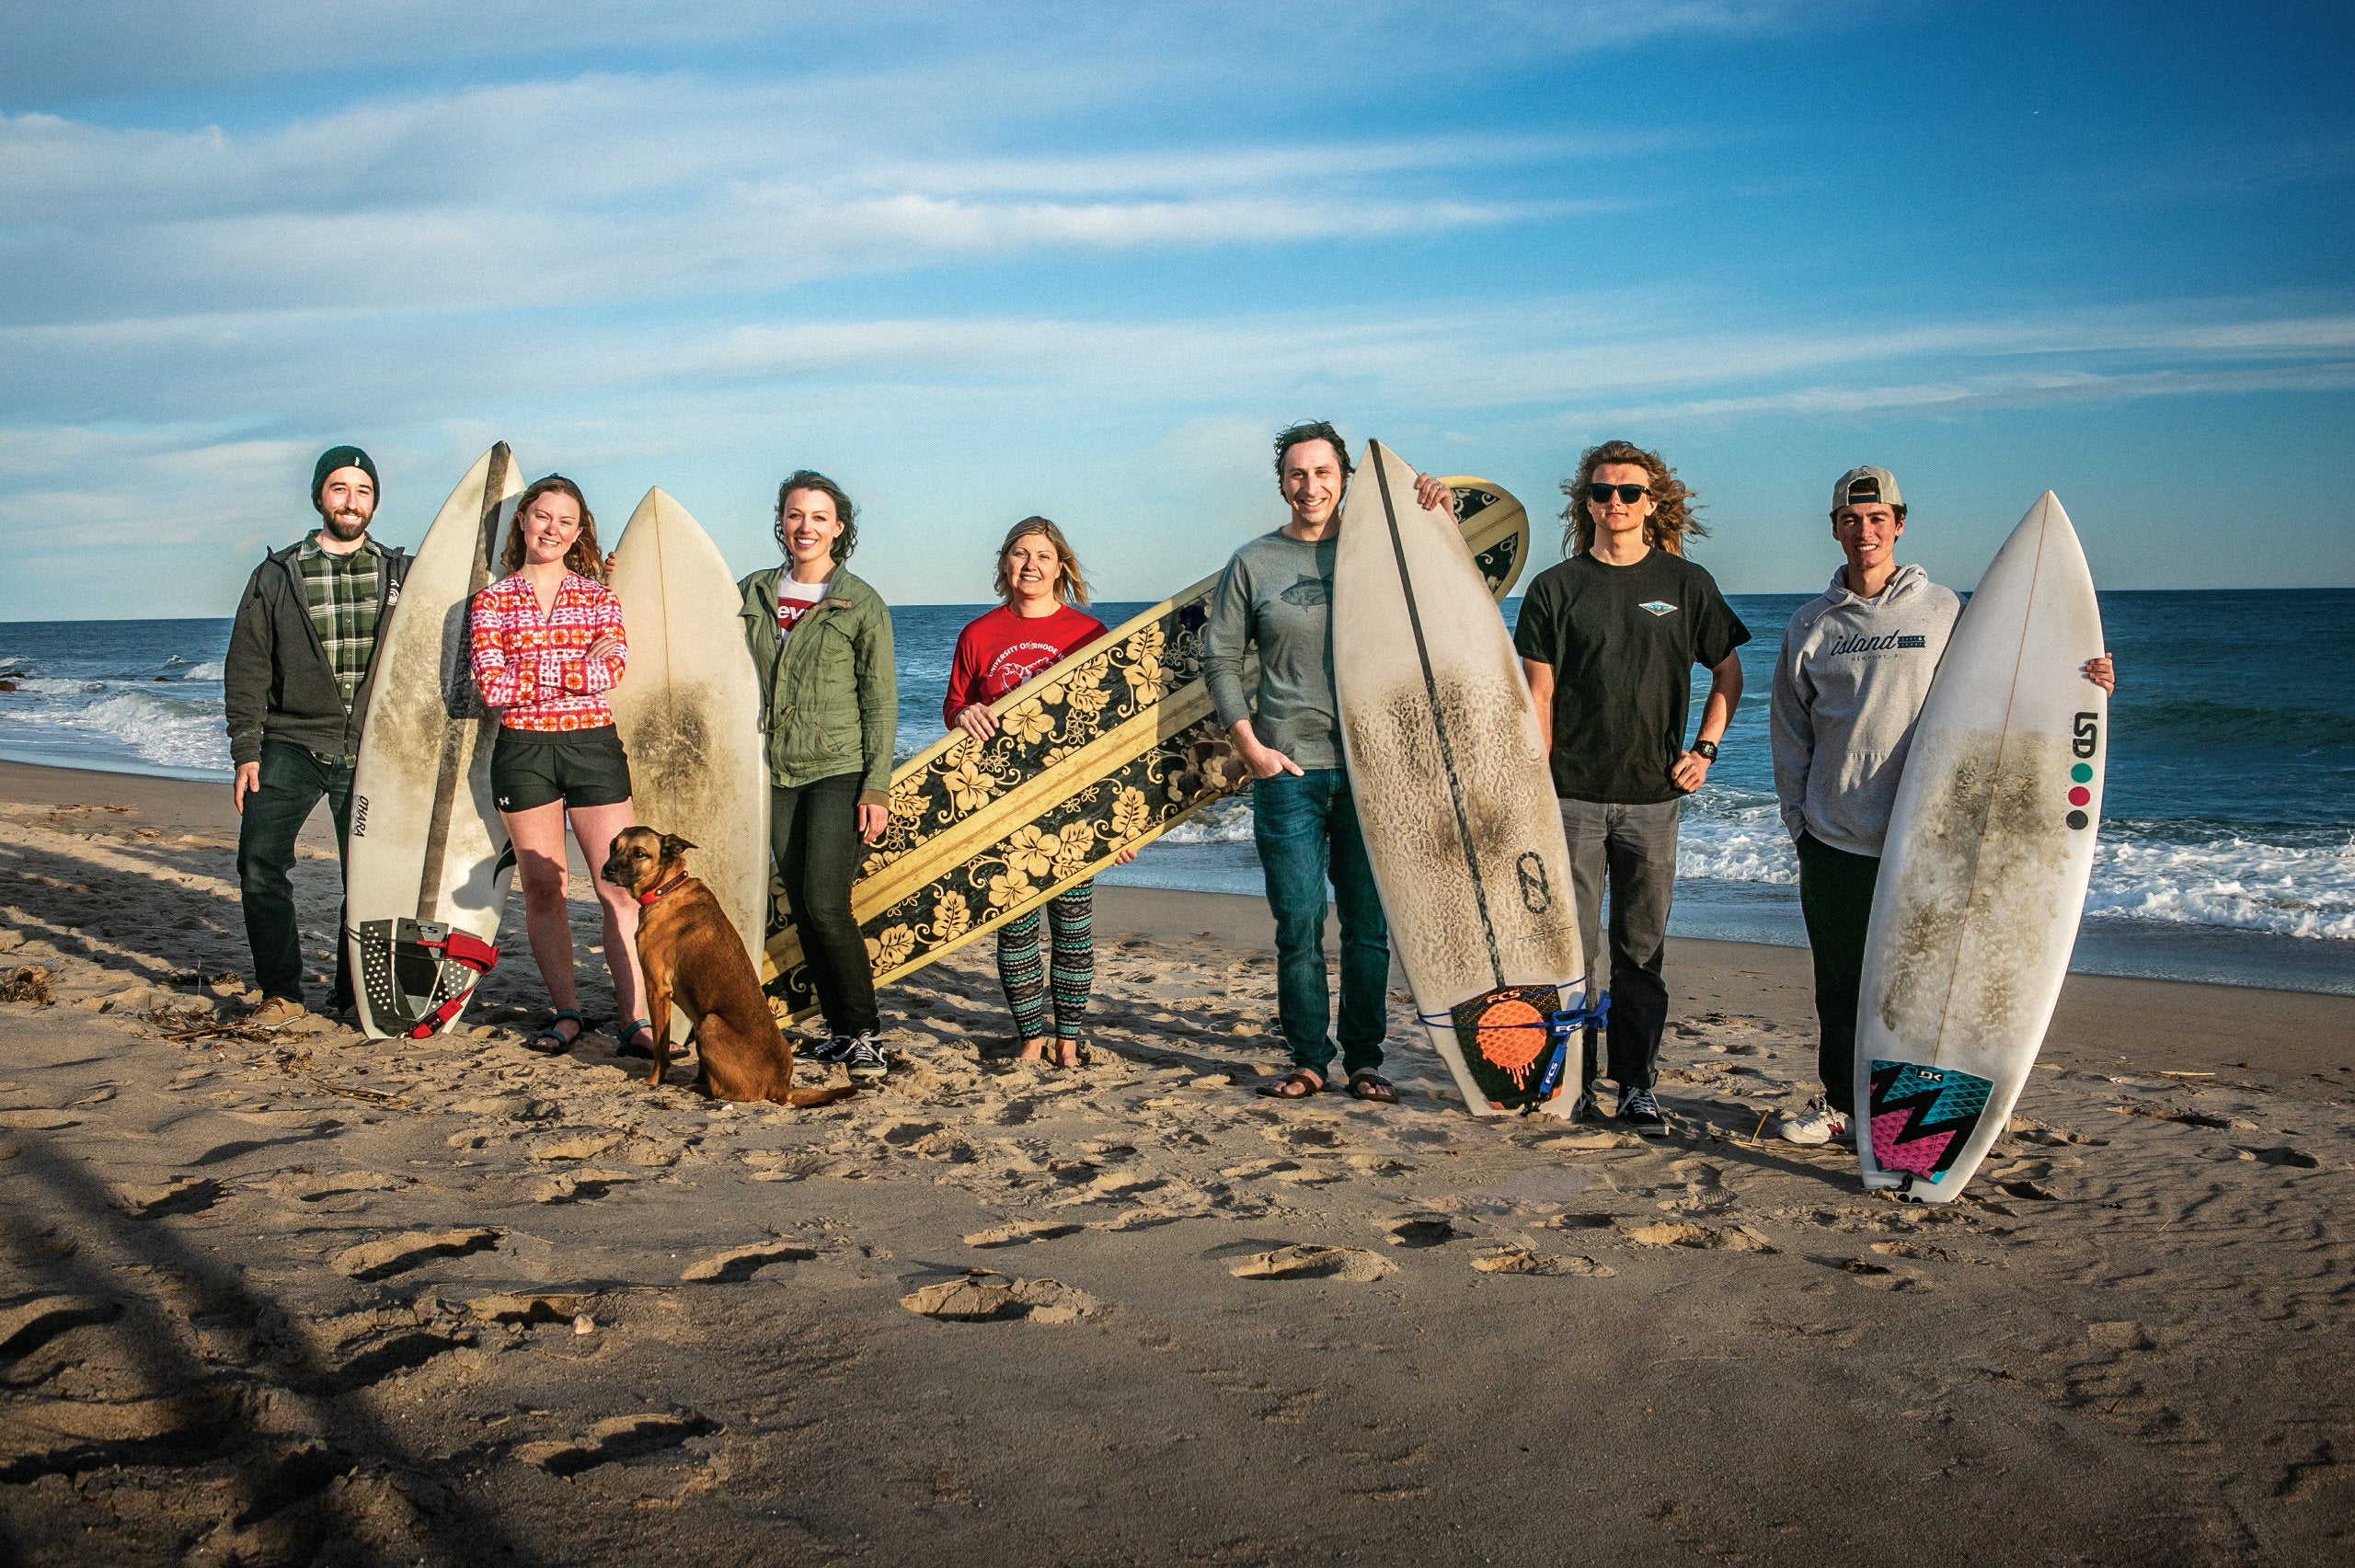 URI students and faculty posing with surf boards at Narragansett beach